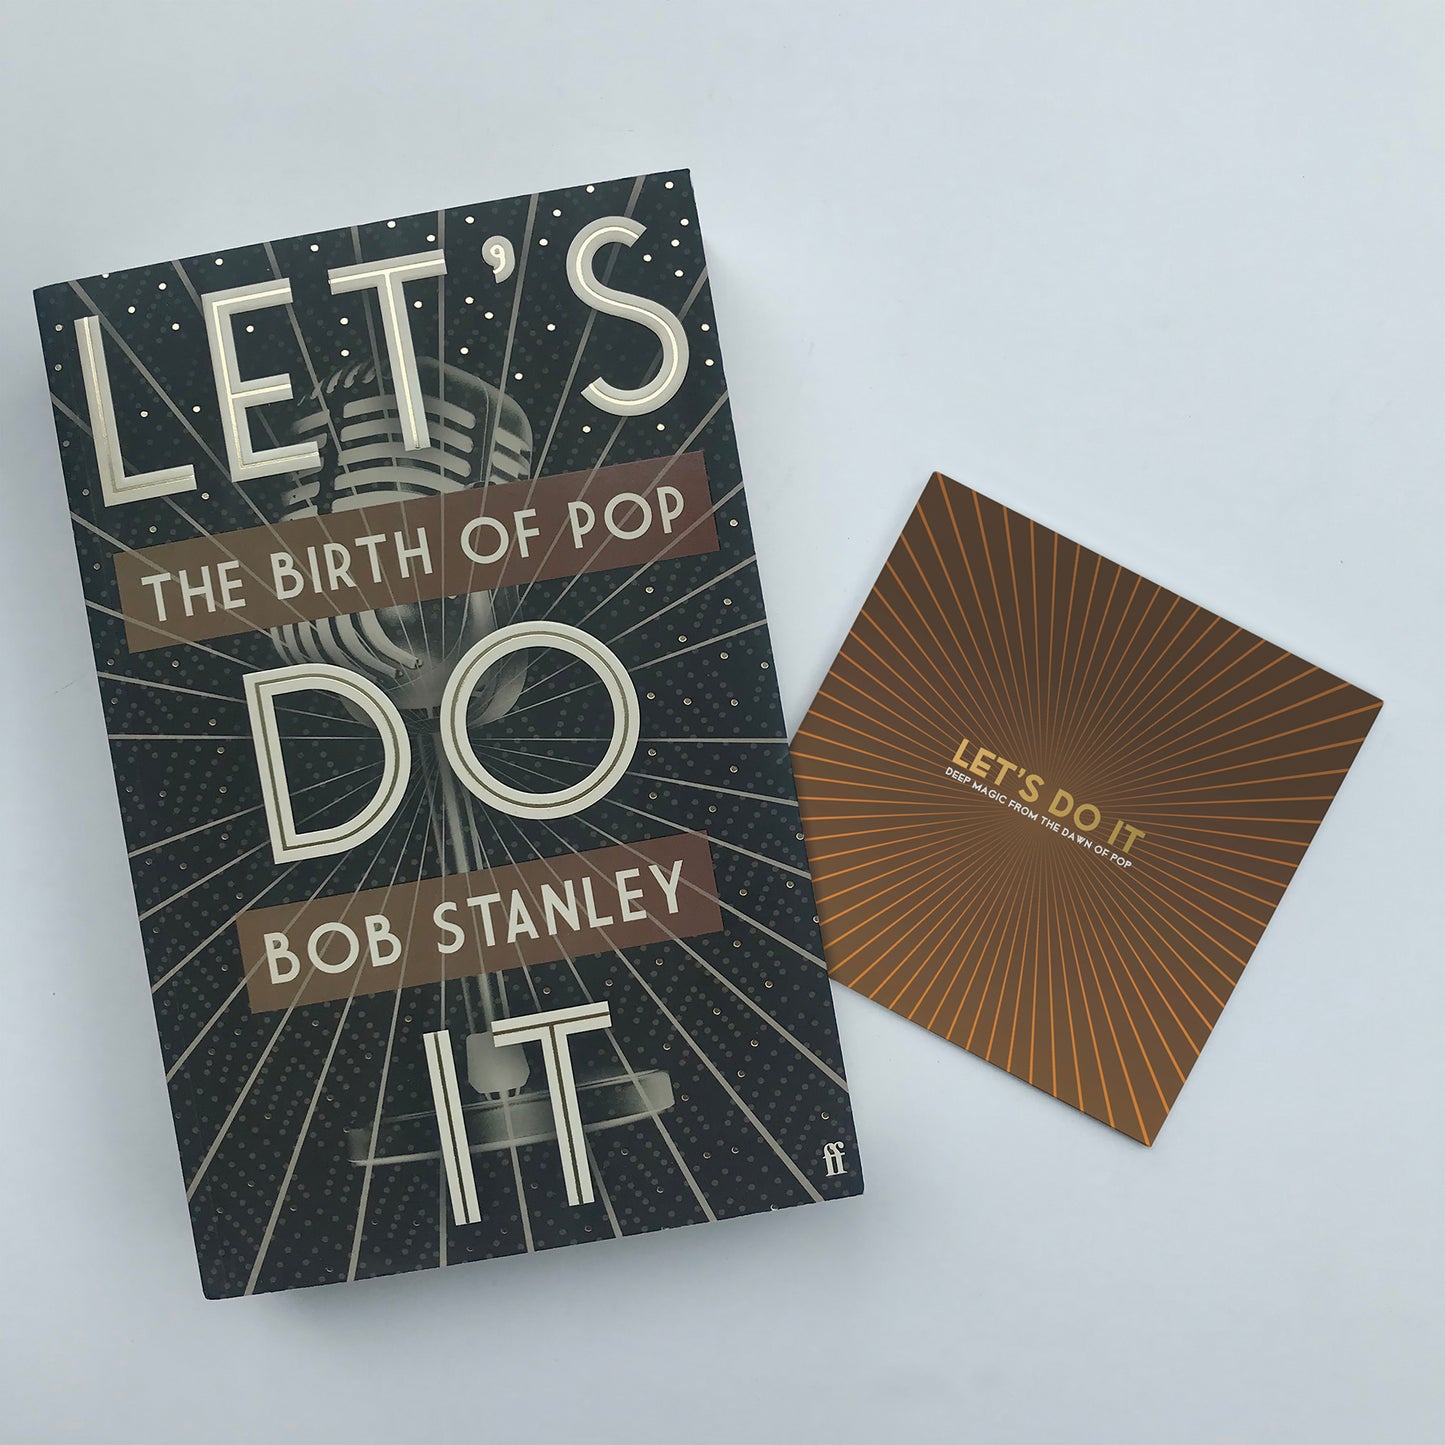 Let's Do It: The Birth Of Pop - Book and CD